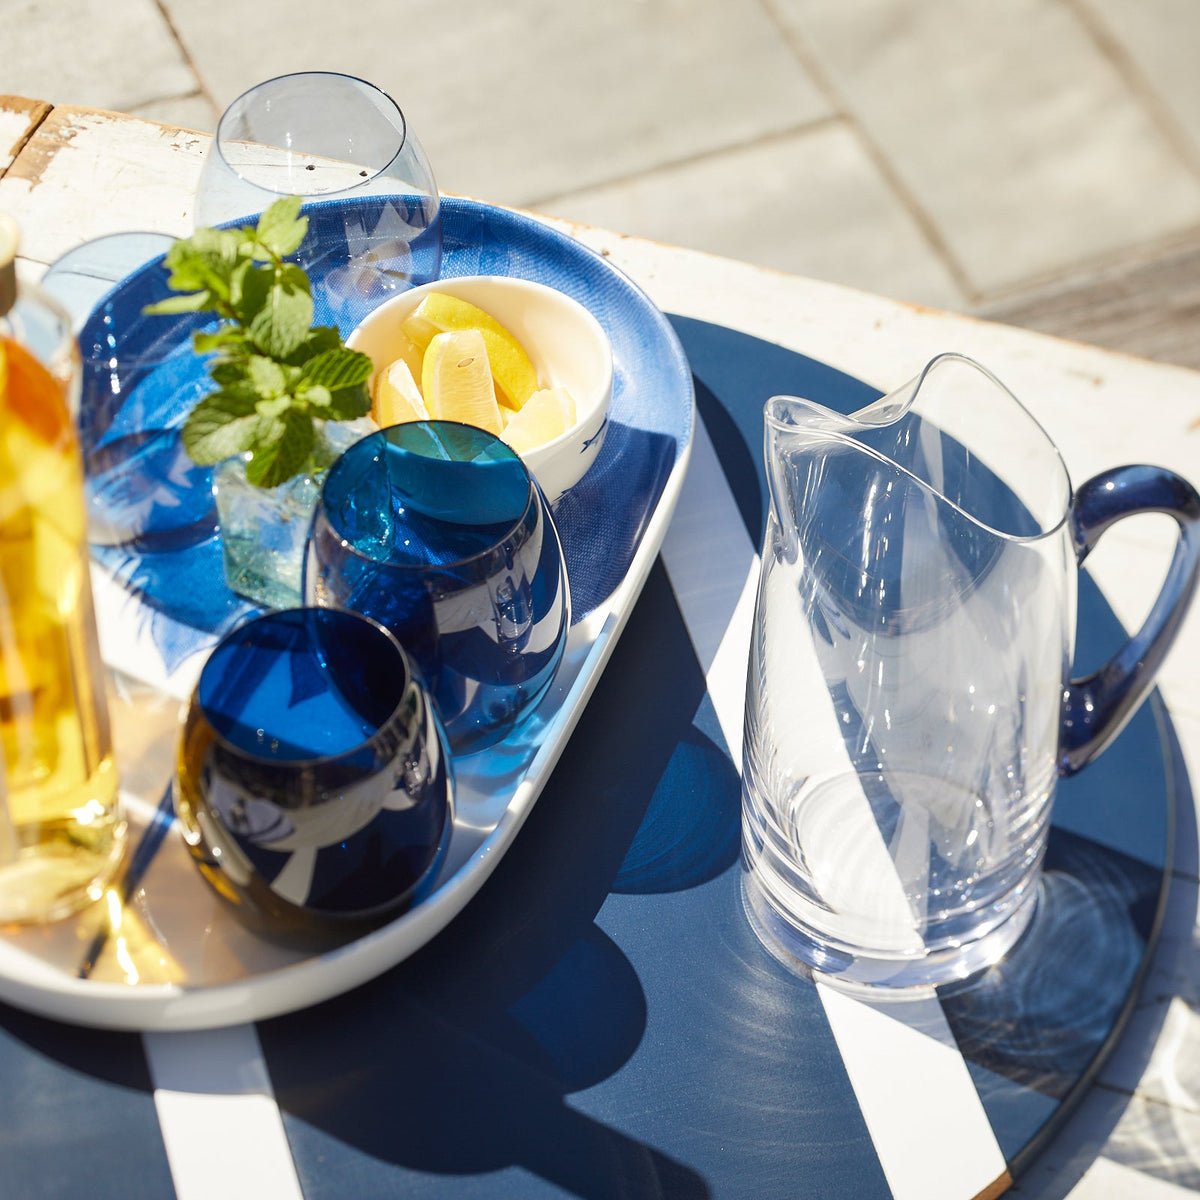 A Les Nuages Blue Handle Small Pitcher by Caskata and lead-free crystal glasses on a blue and white tray, accompanied by fresh lemons.